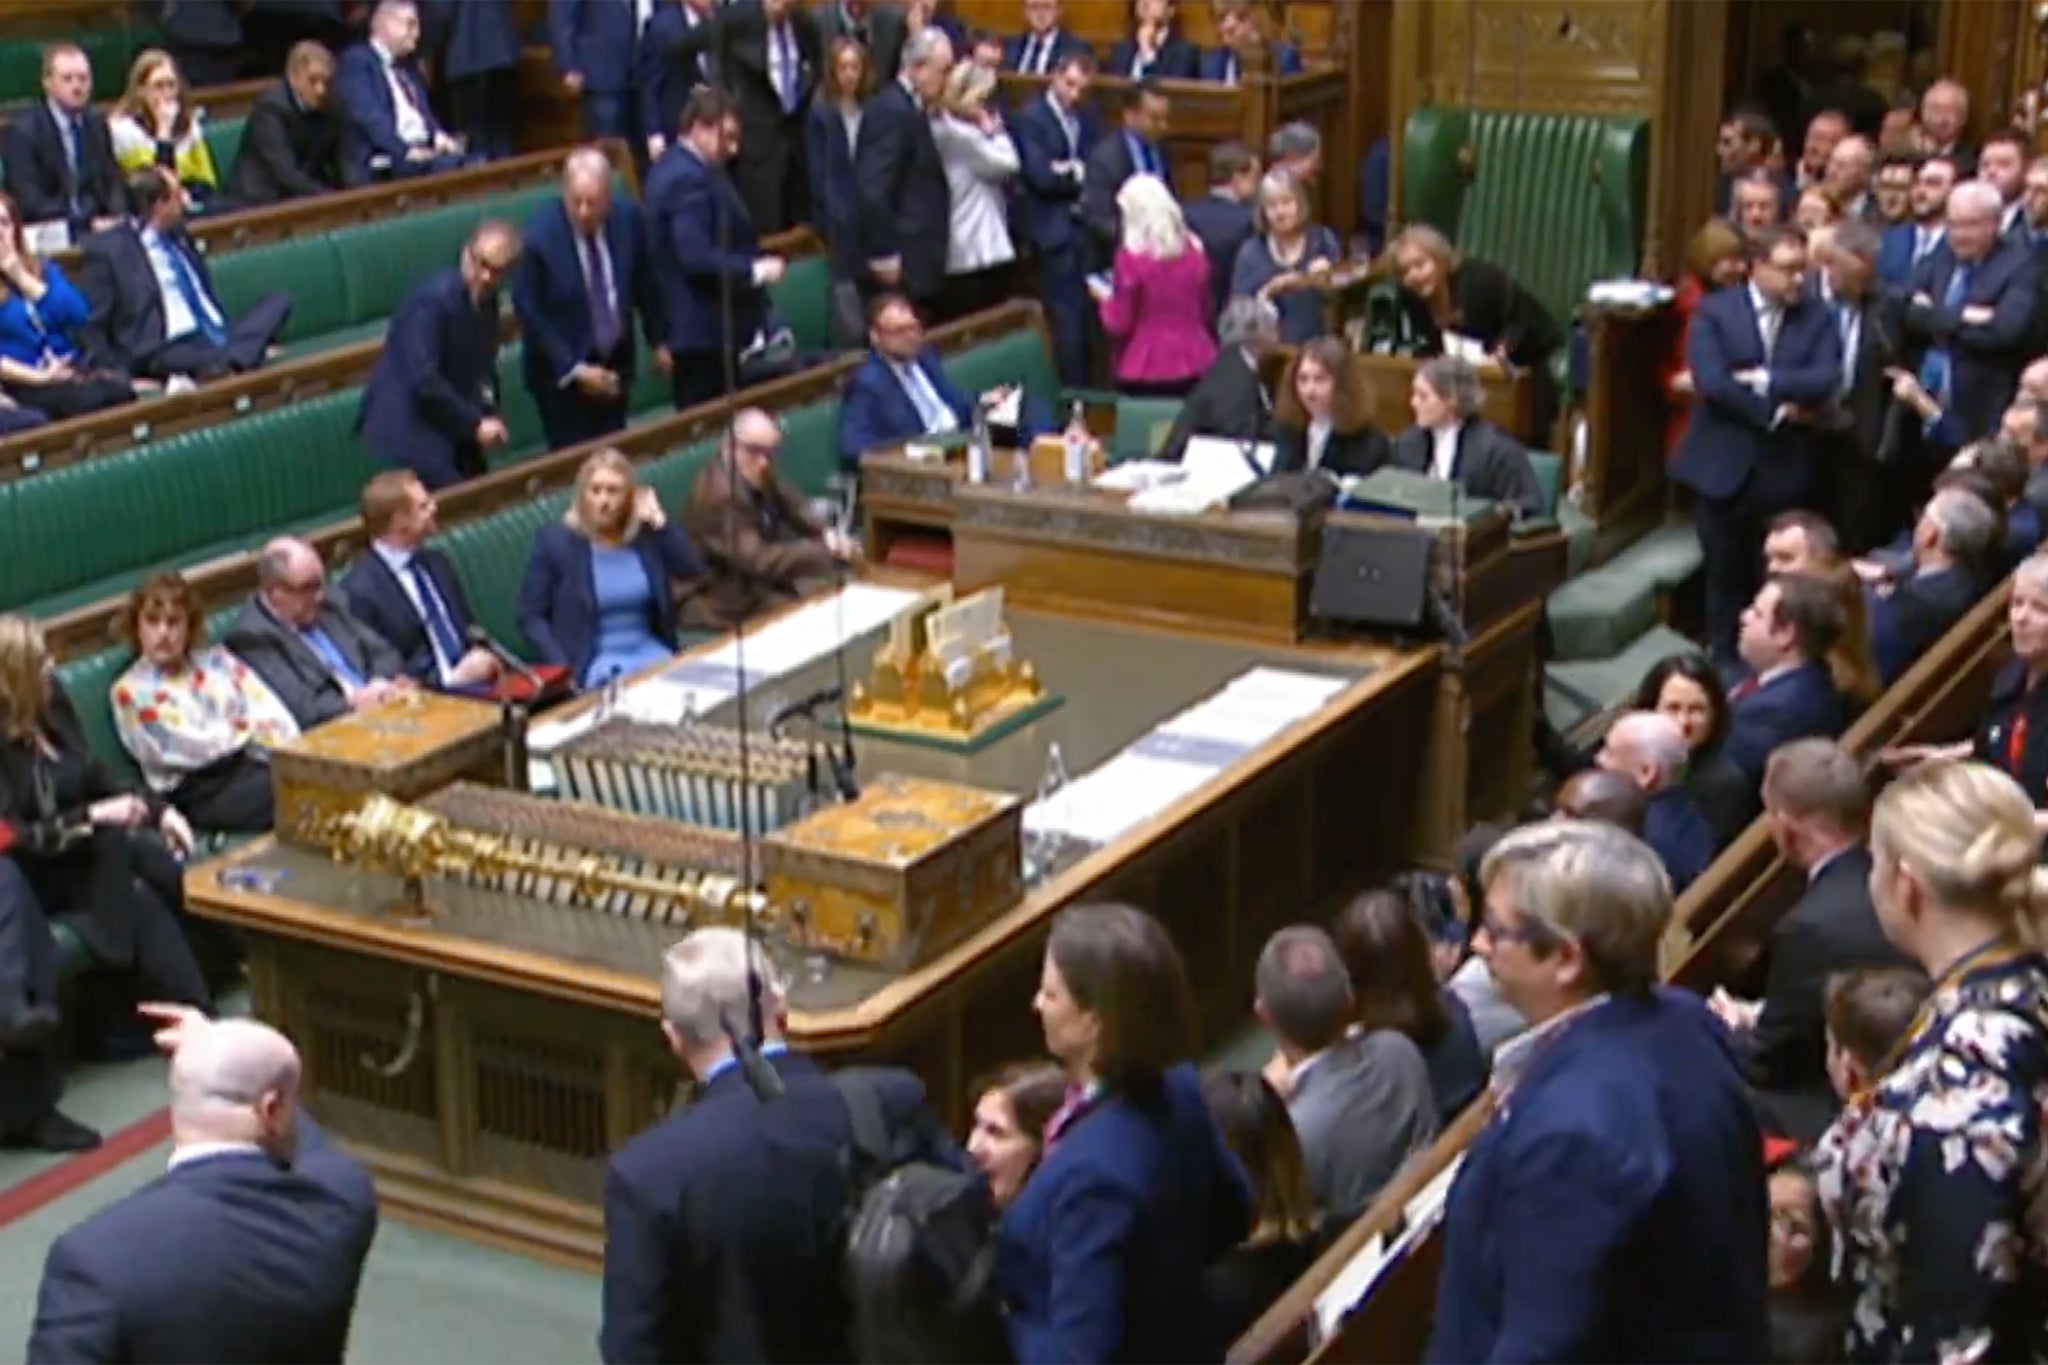 MPs leave the House of Commons in anger as the motion on a Gaza ceasefire descends into chaos